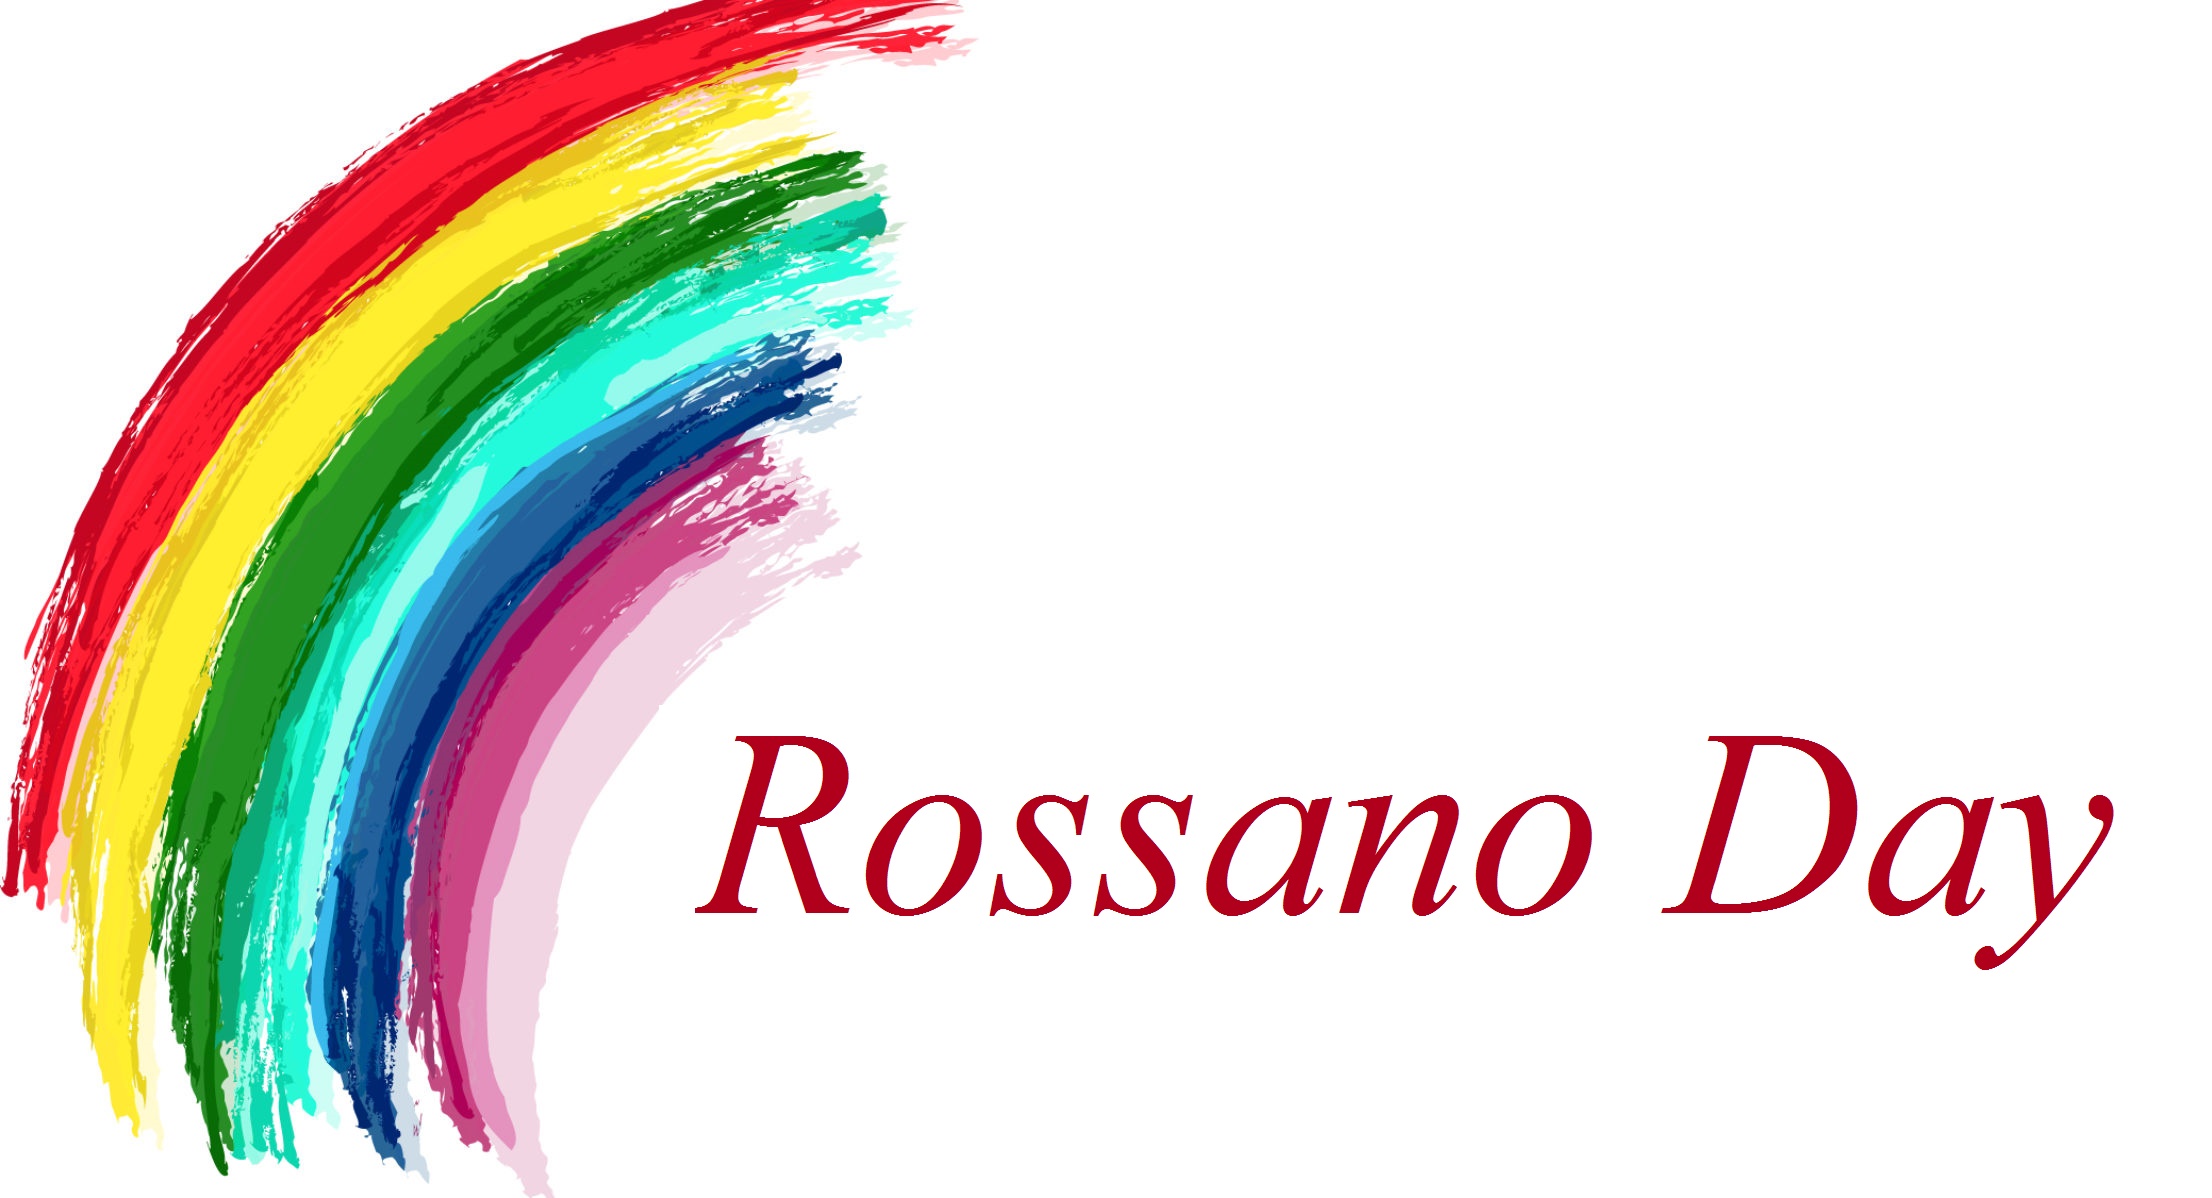 Rossano day